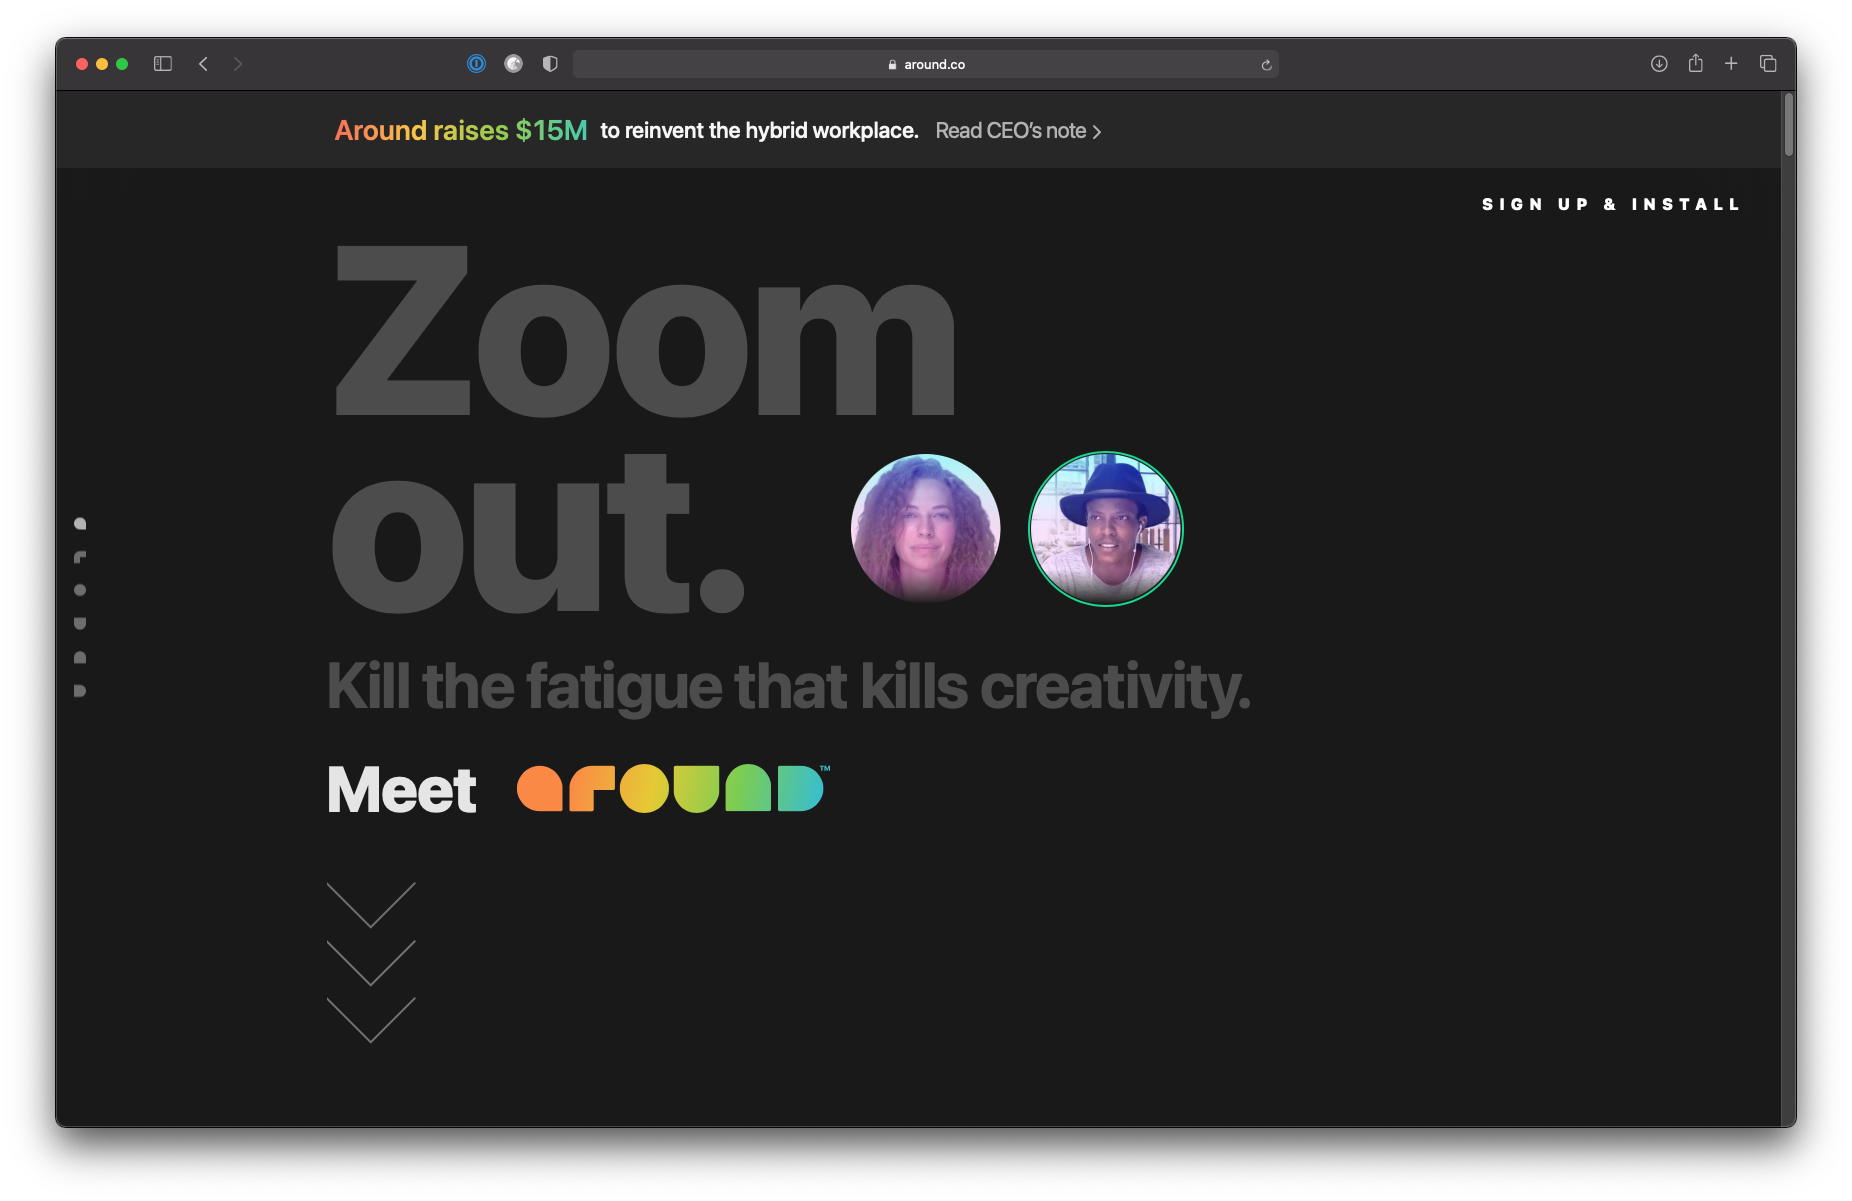 A screenshot of Around's website showing faces cropped in a circle and the quote "Zoom out. Kill the fatigue that kills creativity."